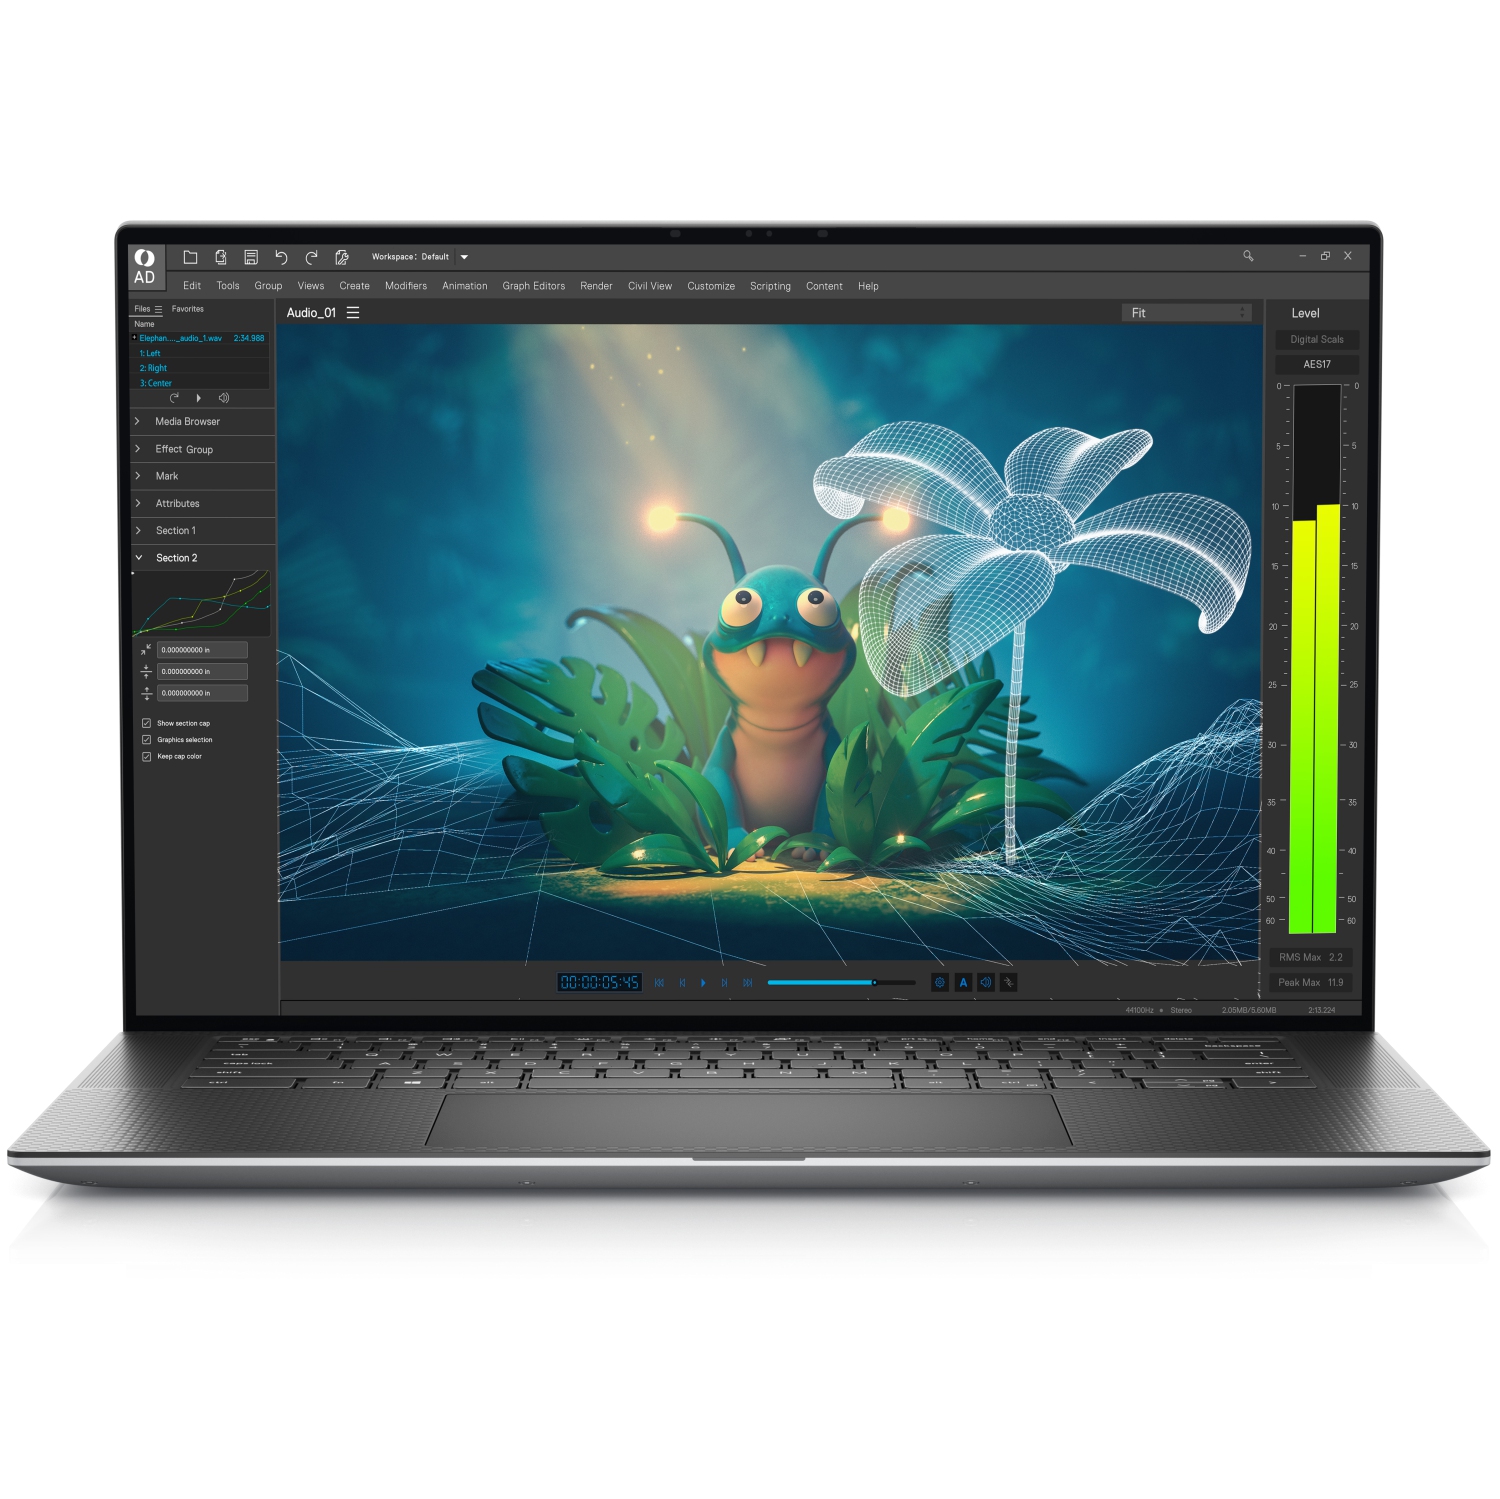 Refurbished (Excellent) – Dell Precision 5000 5570 Workstation Laptop (2022) | 15.6" 4K Touch | Core i7 - 512GB SSD - 16GB RAM - RTX A2000 | 14 Cores @ 4.7 GHz - 12th Gen CPU